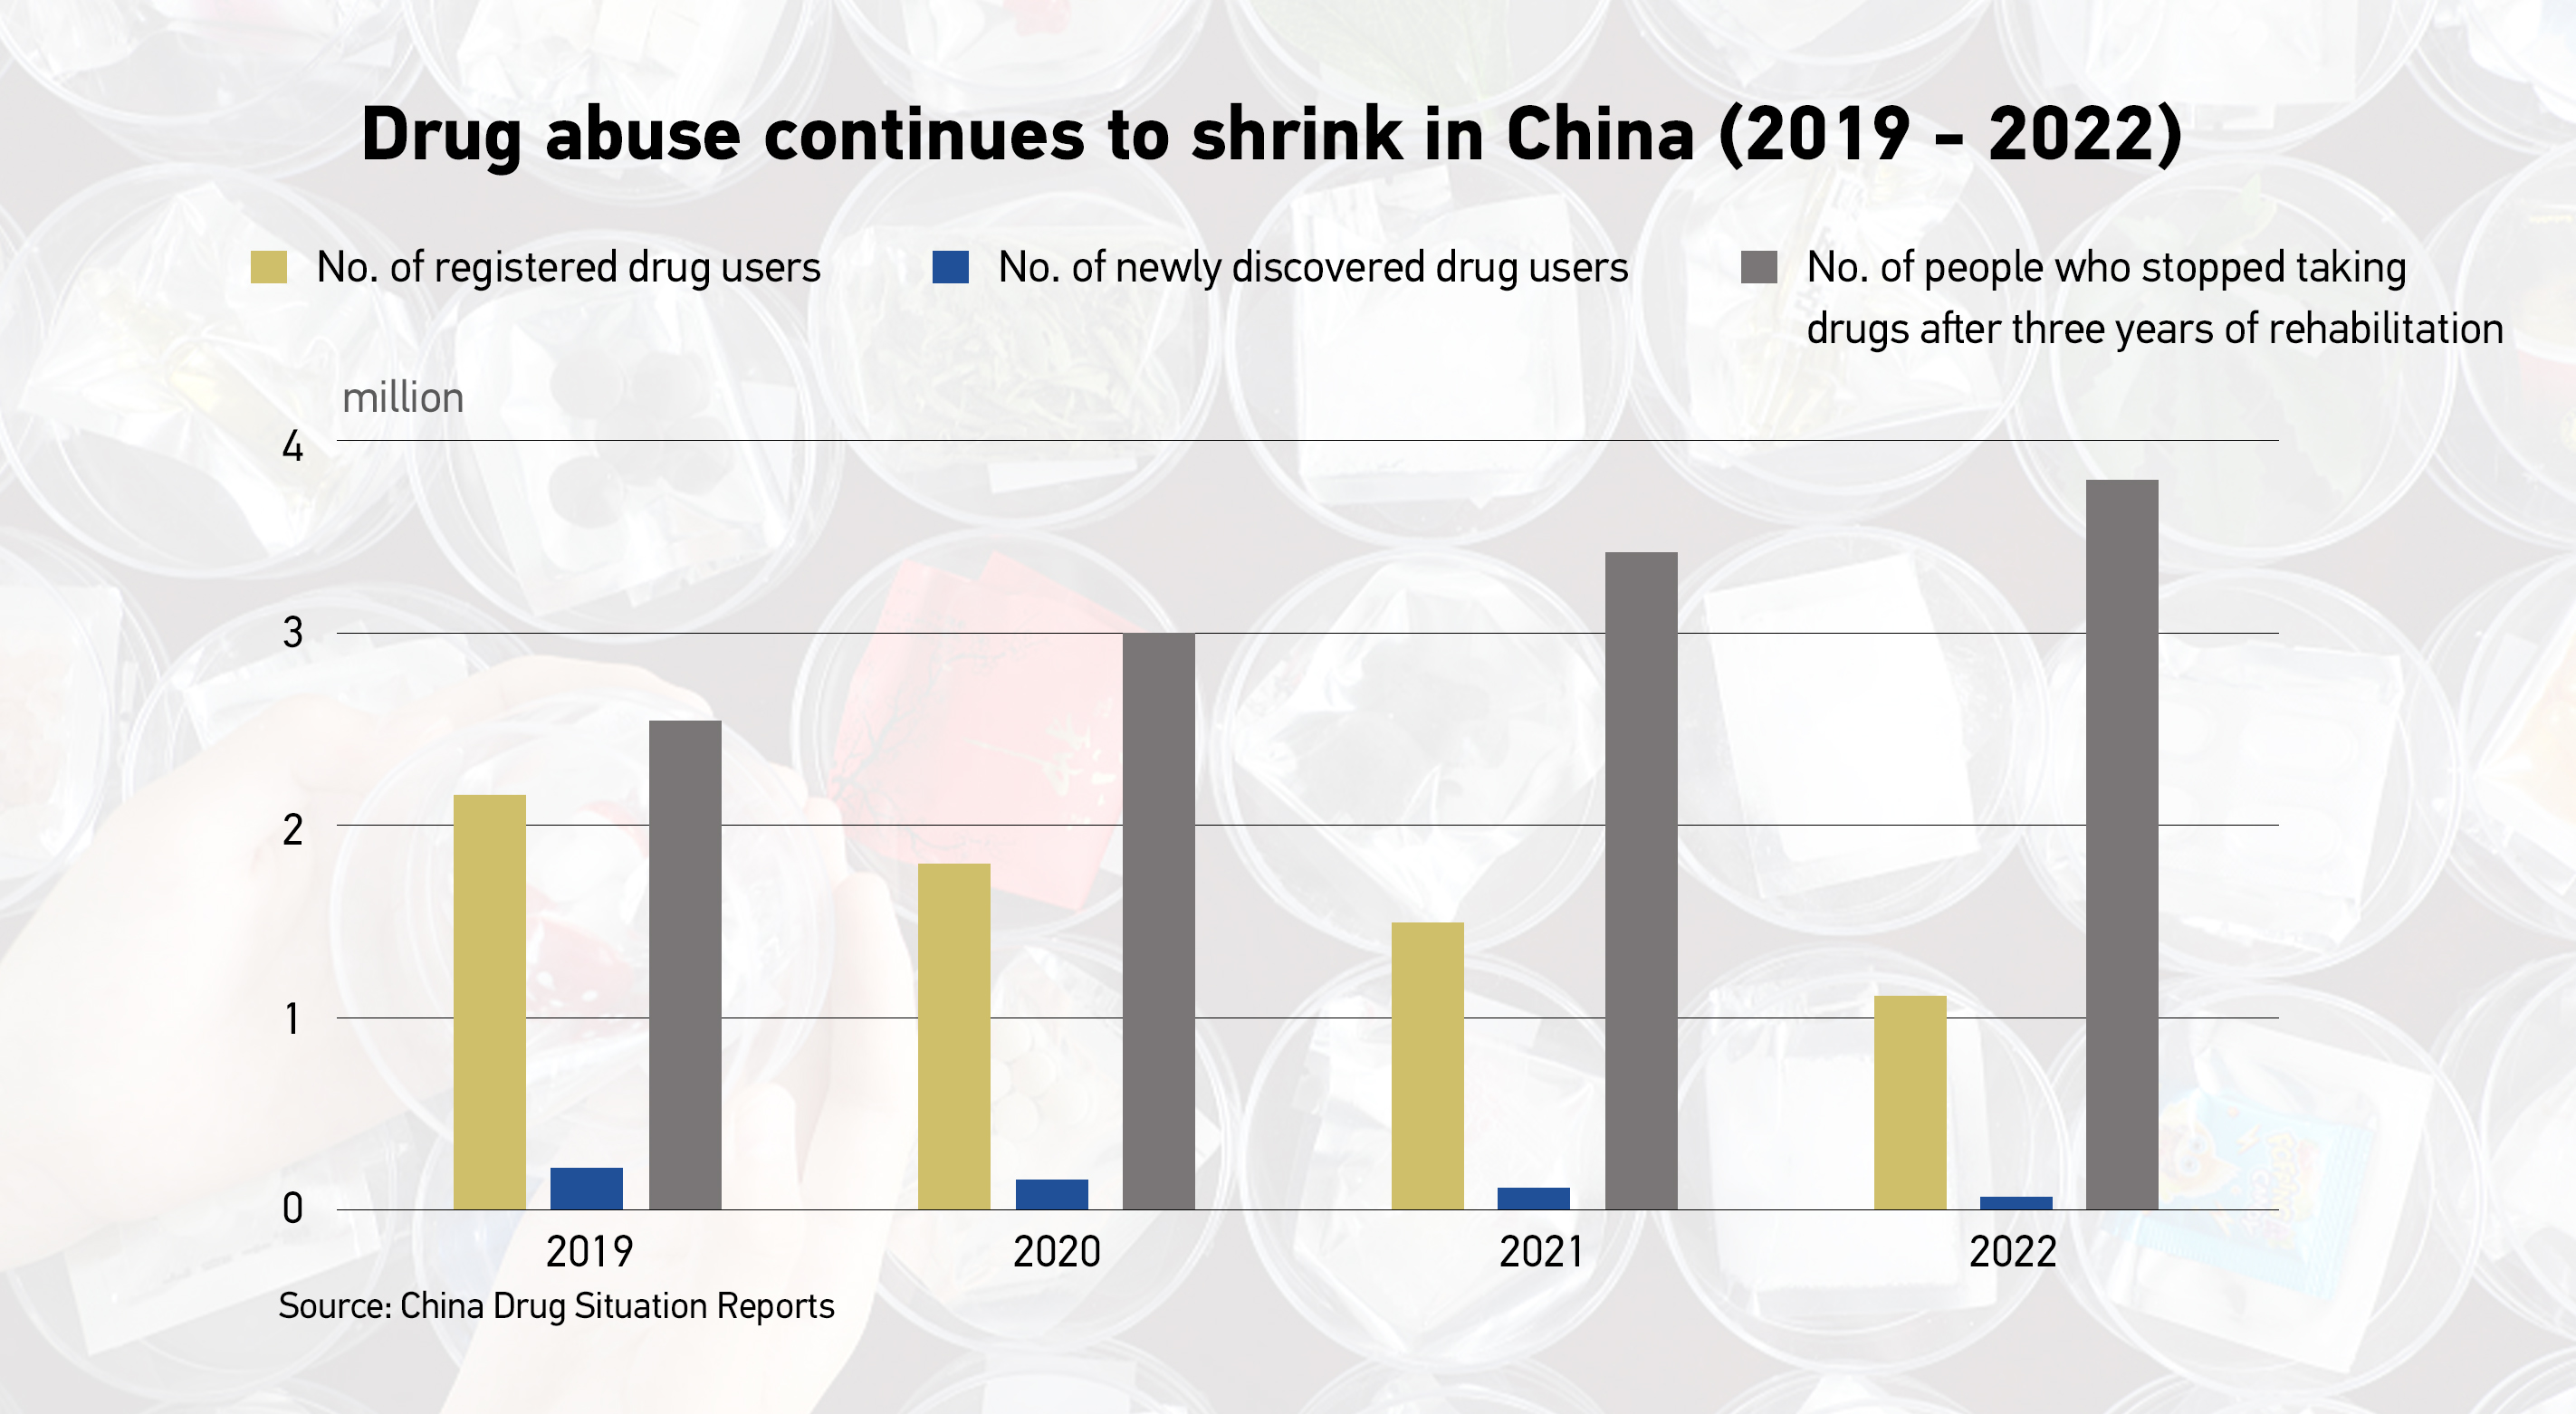 China's battle against drugs sees progress but challenges remain